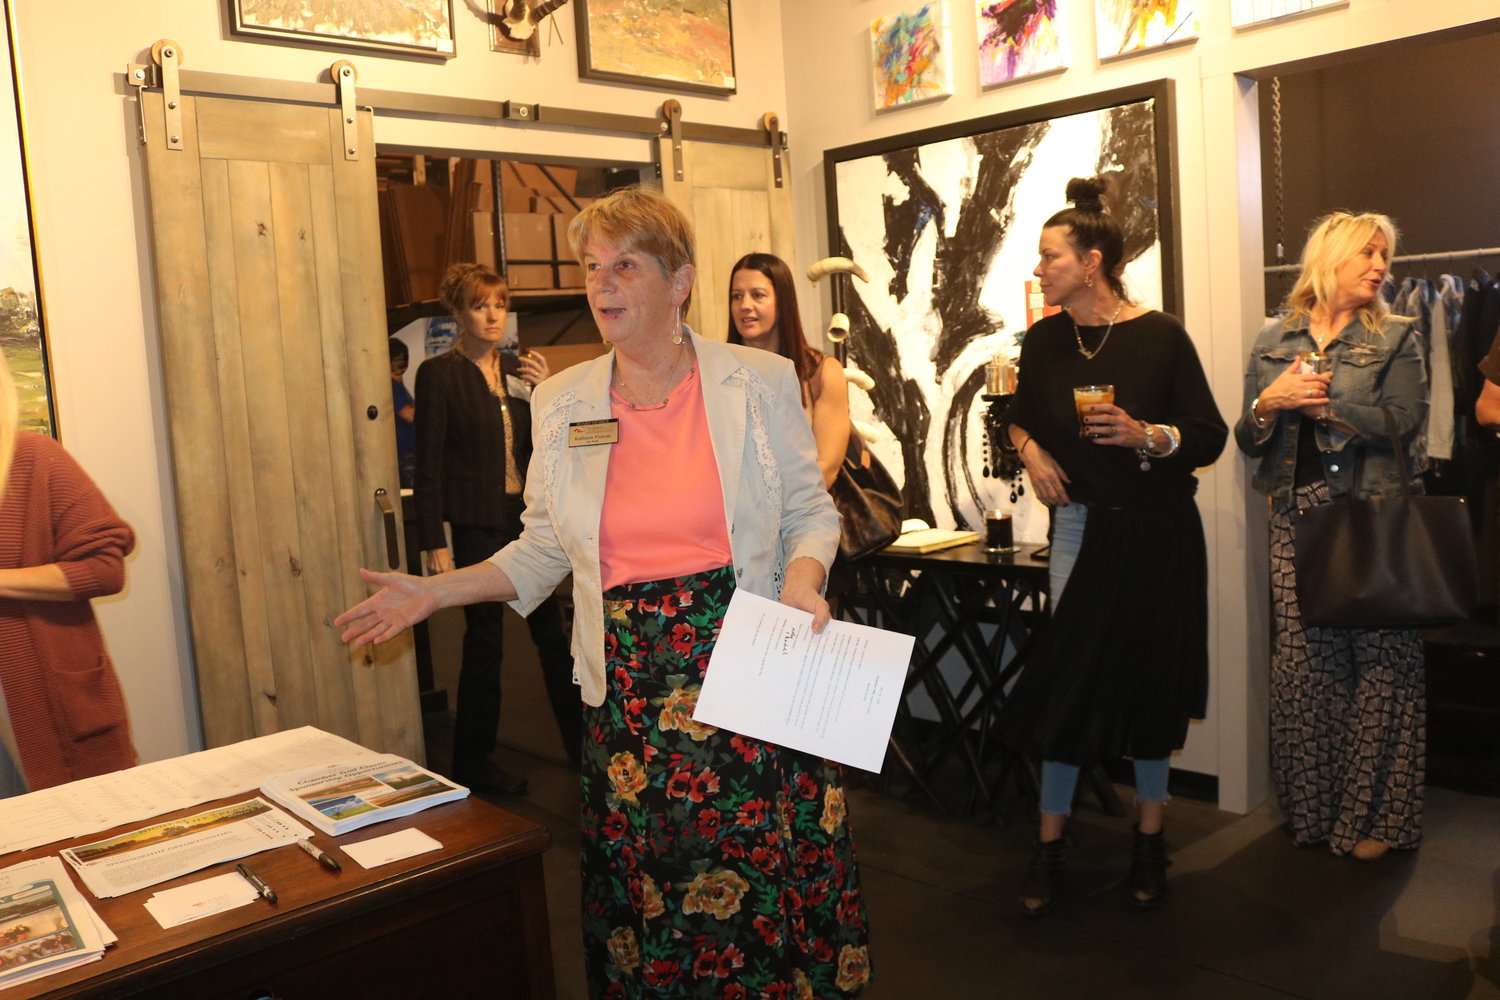 Kathleen Floryan is surrounded by artwork as she speaks to those in attendance during the “After Hours” event hosted by John Beard Art Gallery.